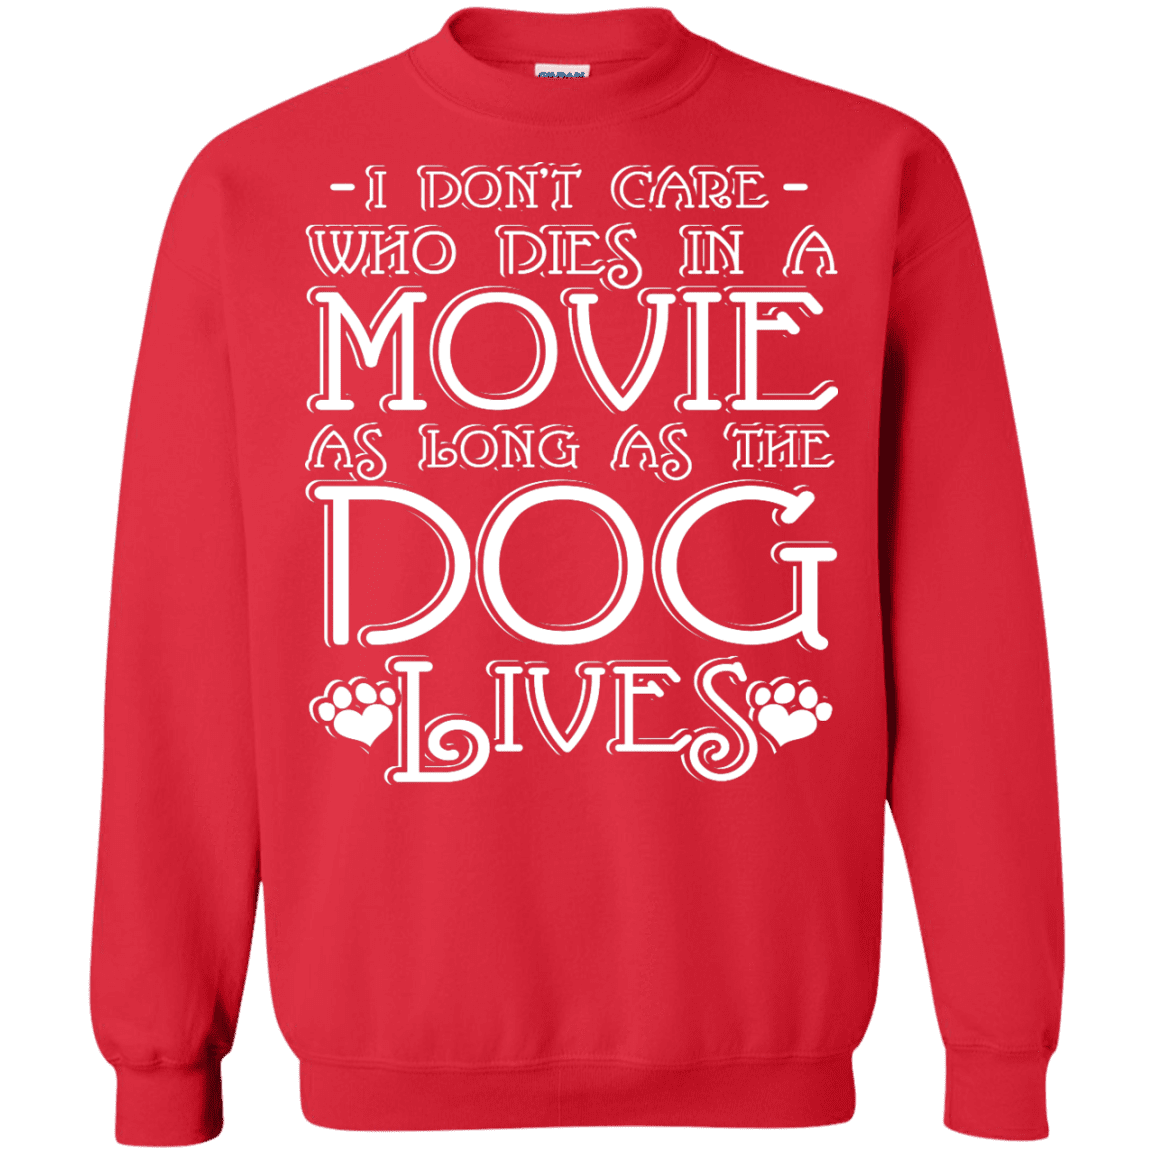 I Dont Care Who Dies In A Movie - Sweatshirt.